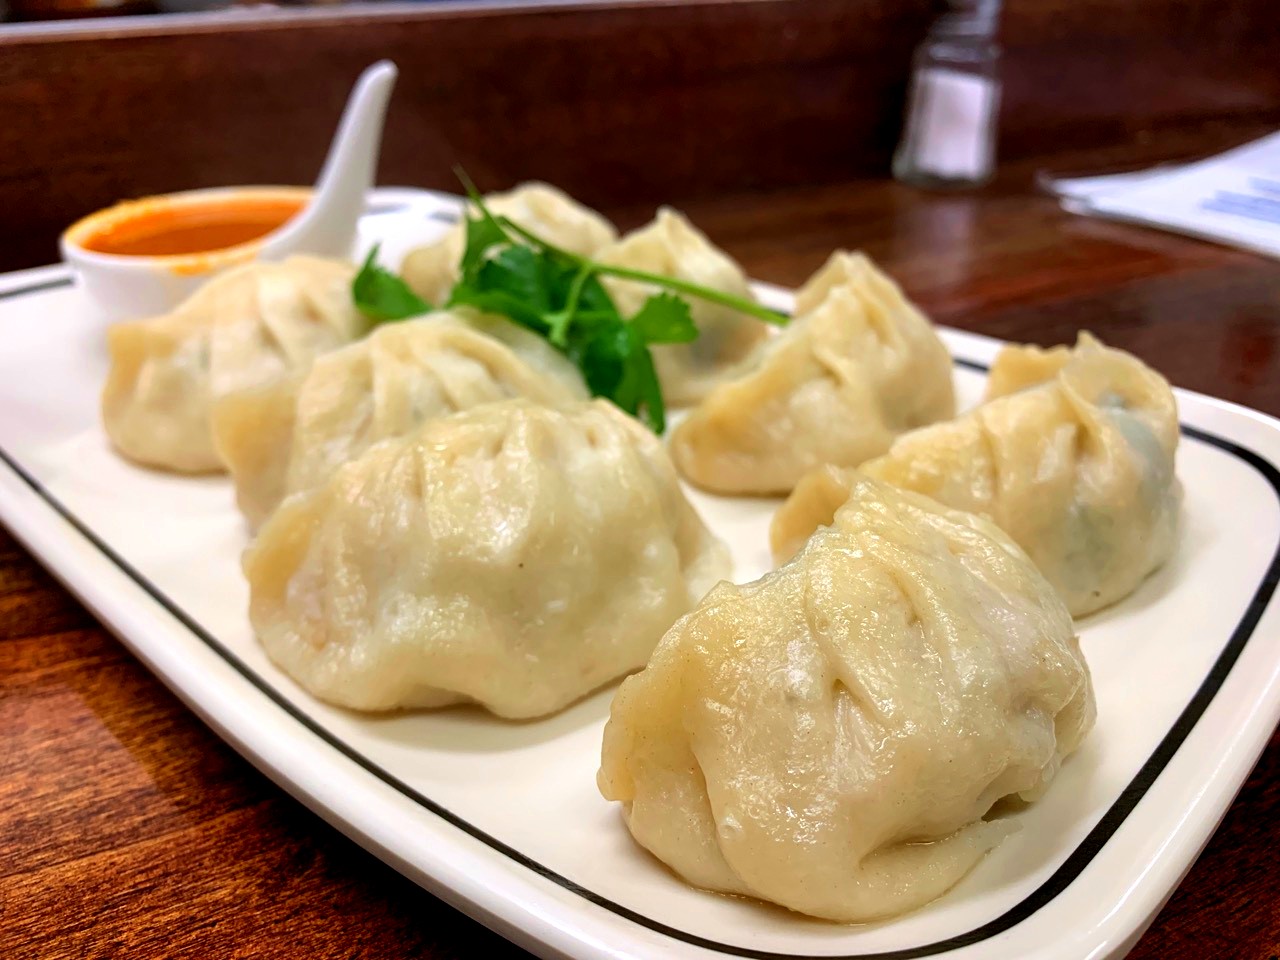 Dumplings on white plate with sauce and herb garnish at Momo Ghar restaurant